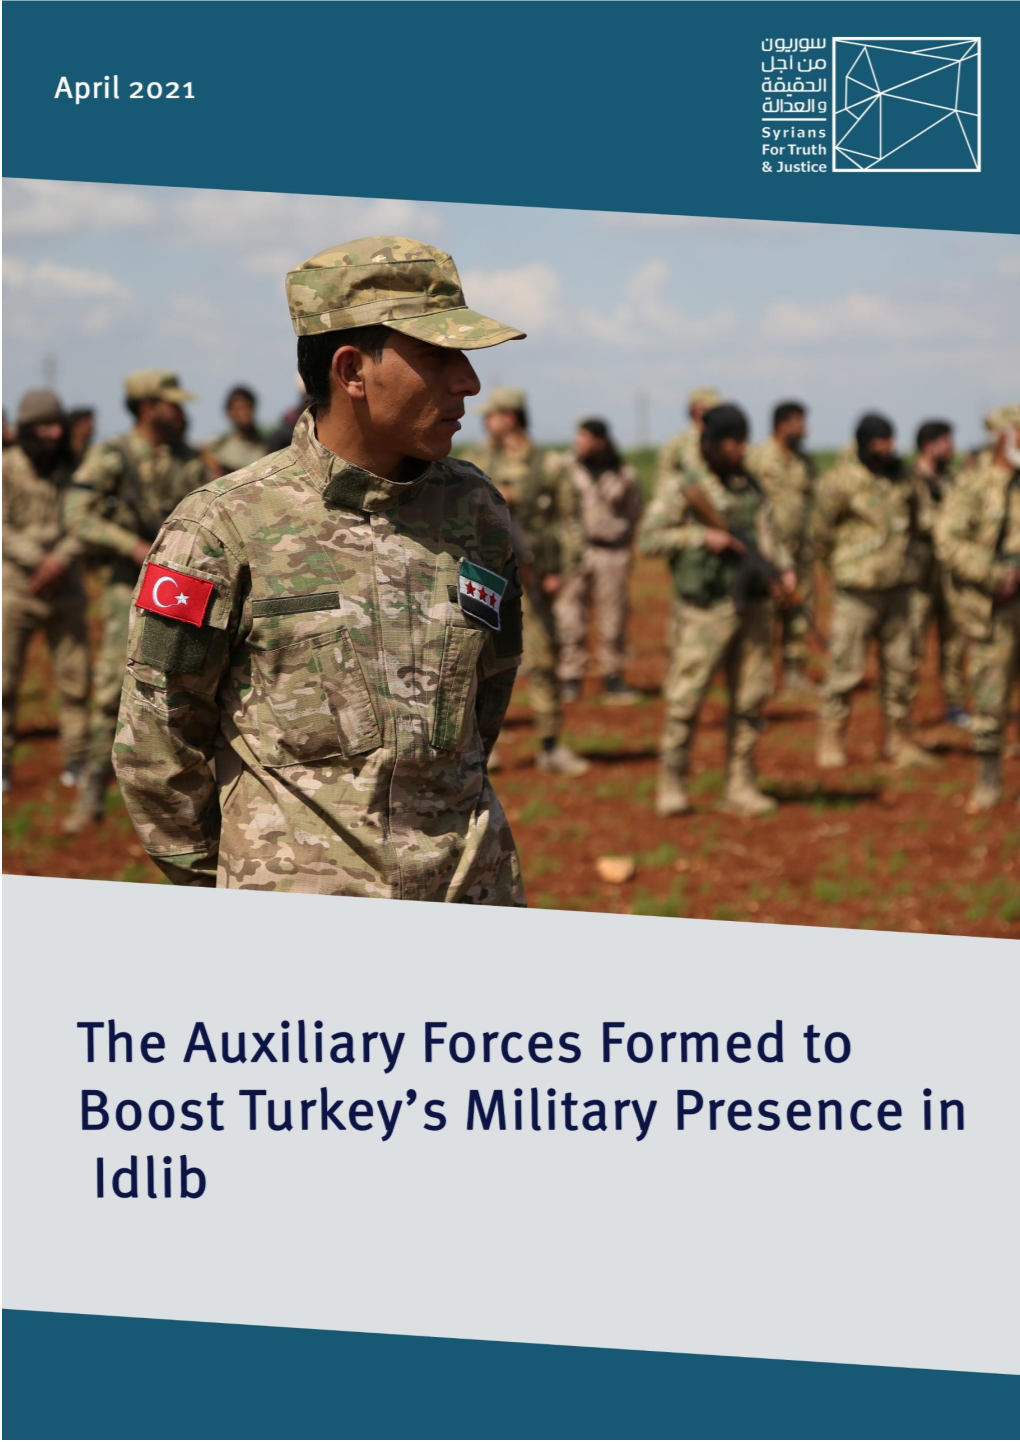 Fighter of the Turkey-Founded Auxiliary Forces Stationed Near the Taftanaz Air Base in Idlib Province